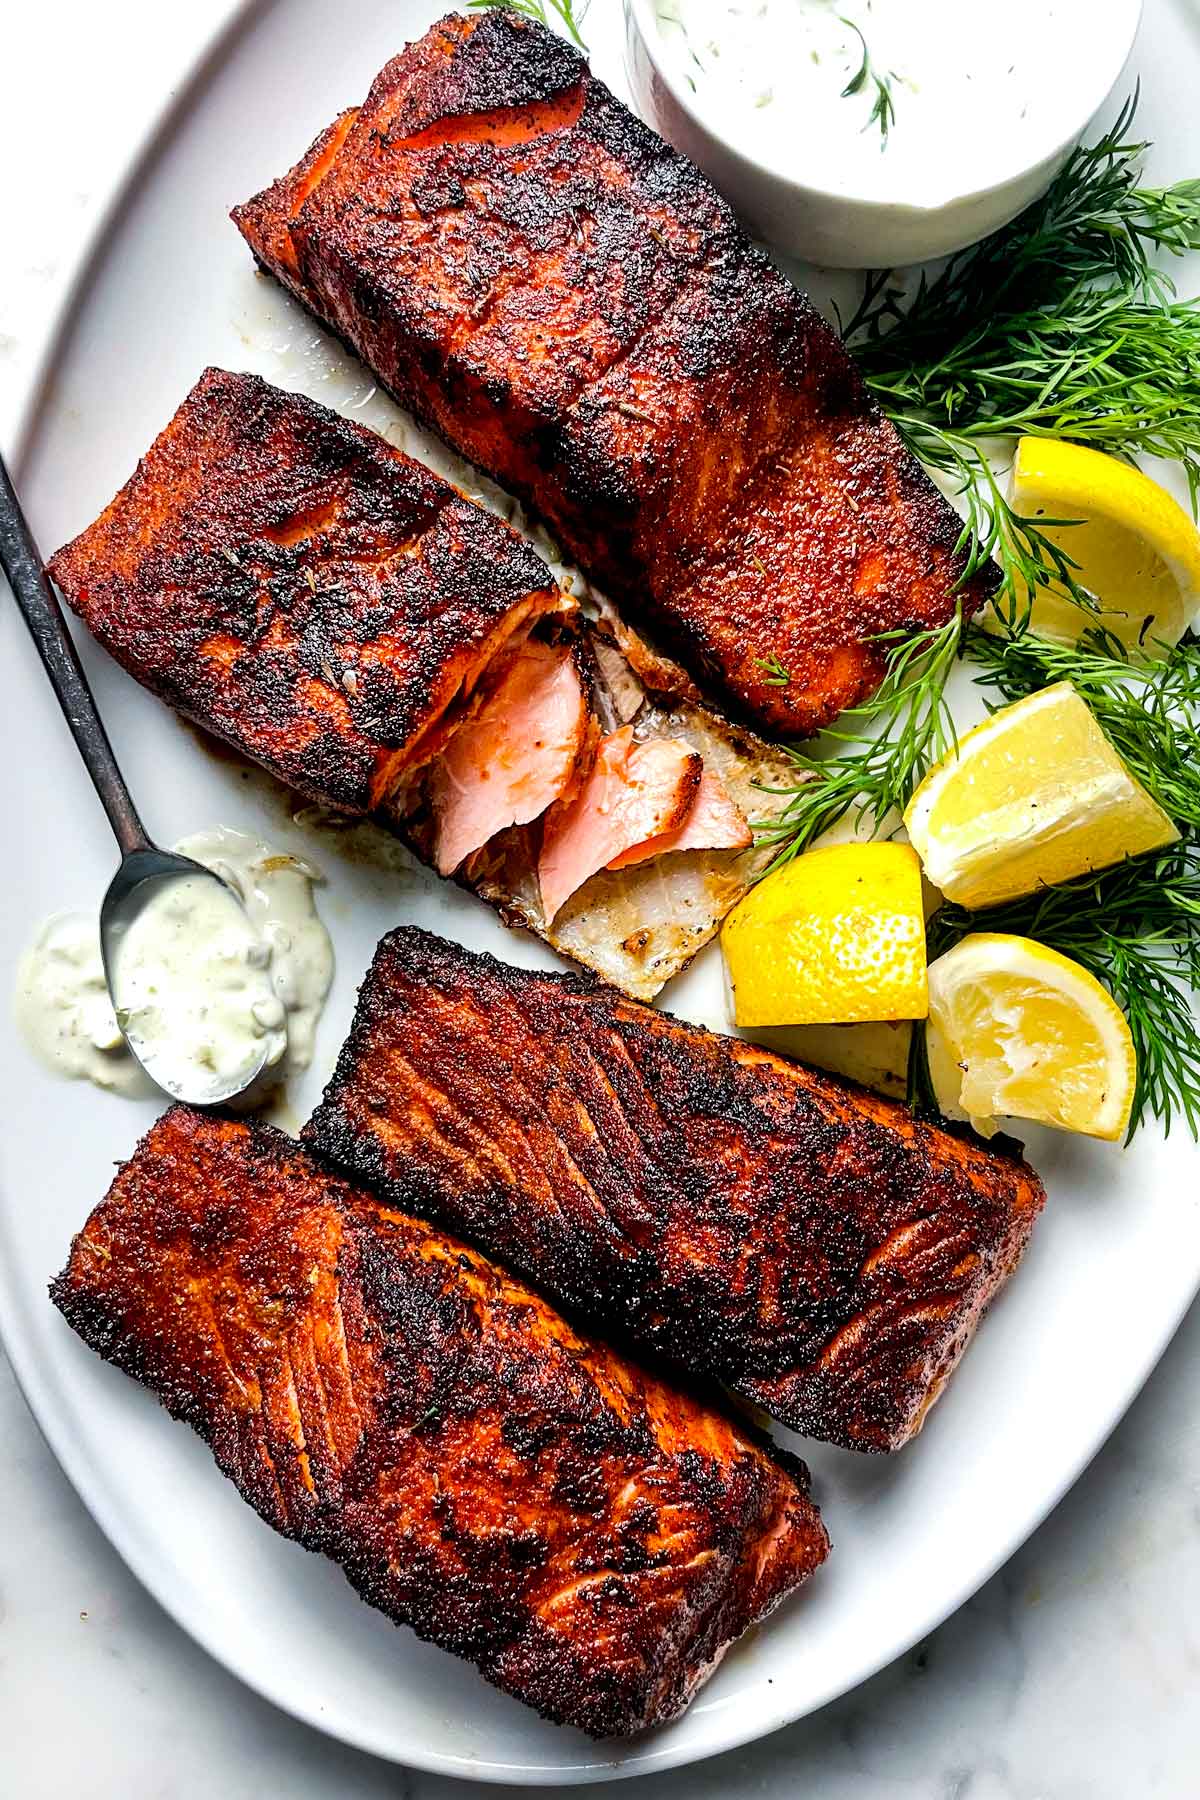 How to Make THE BEST Blackened Salmon